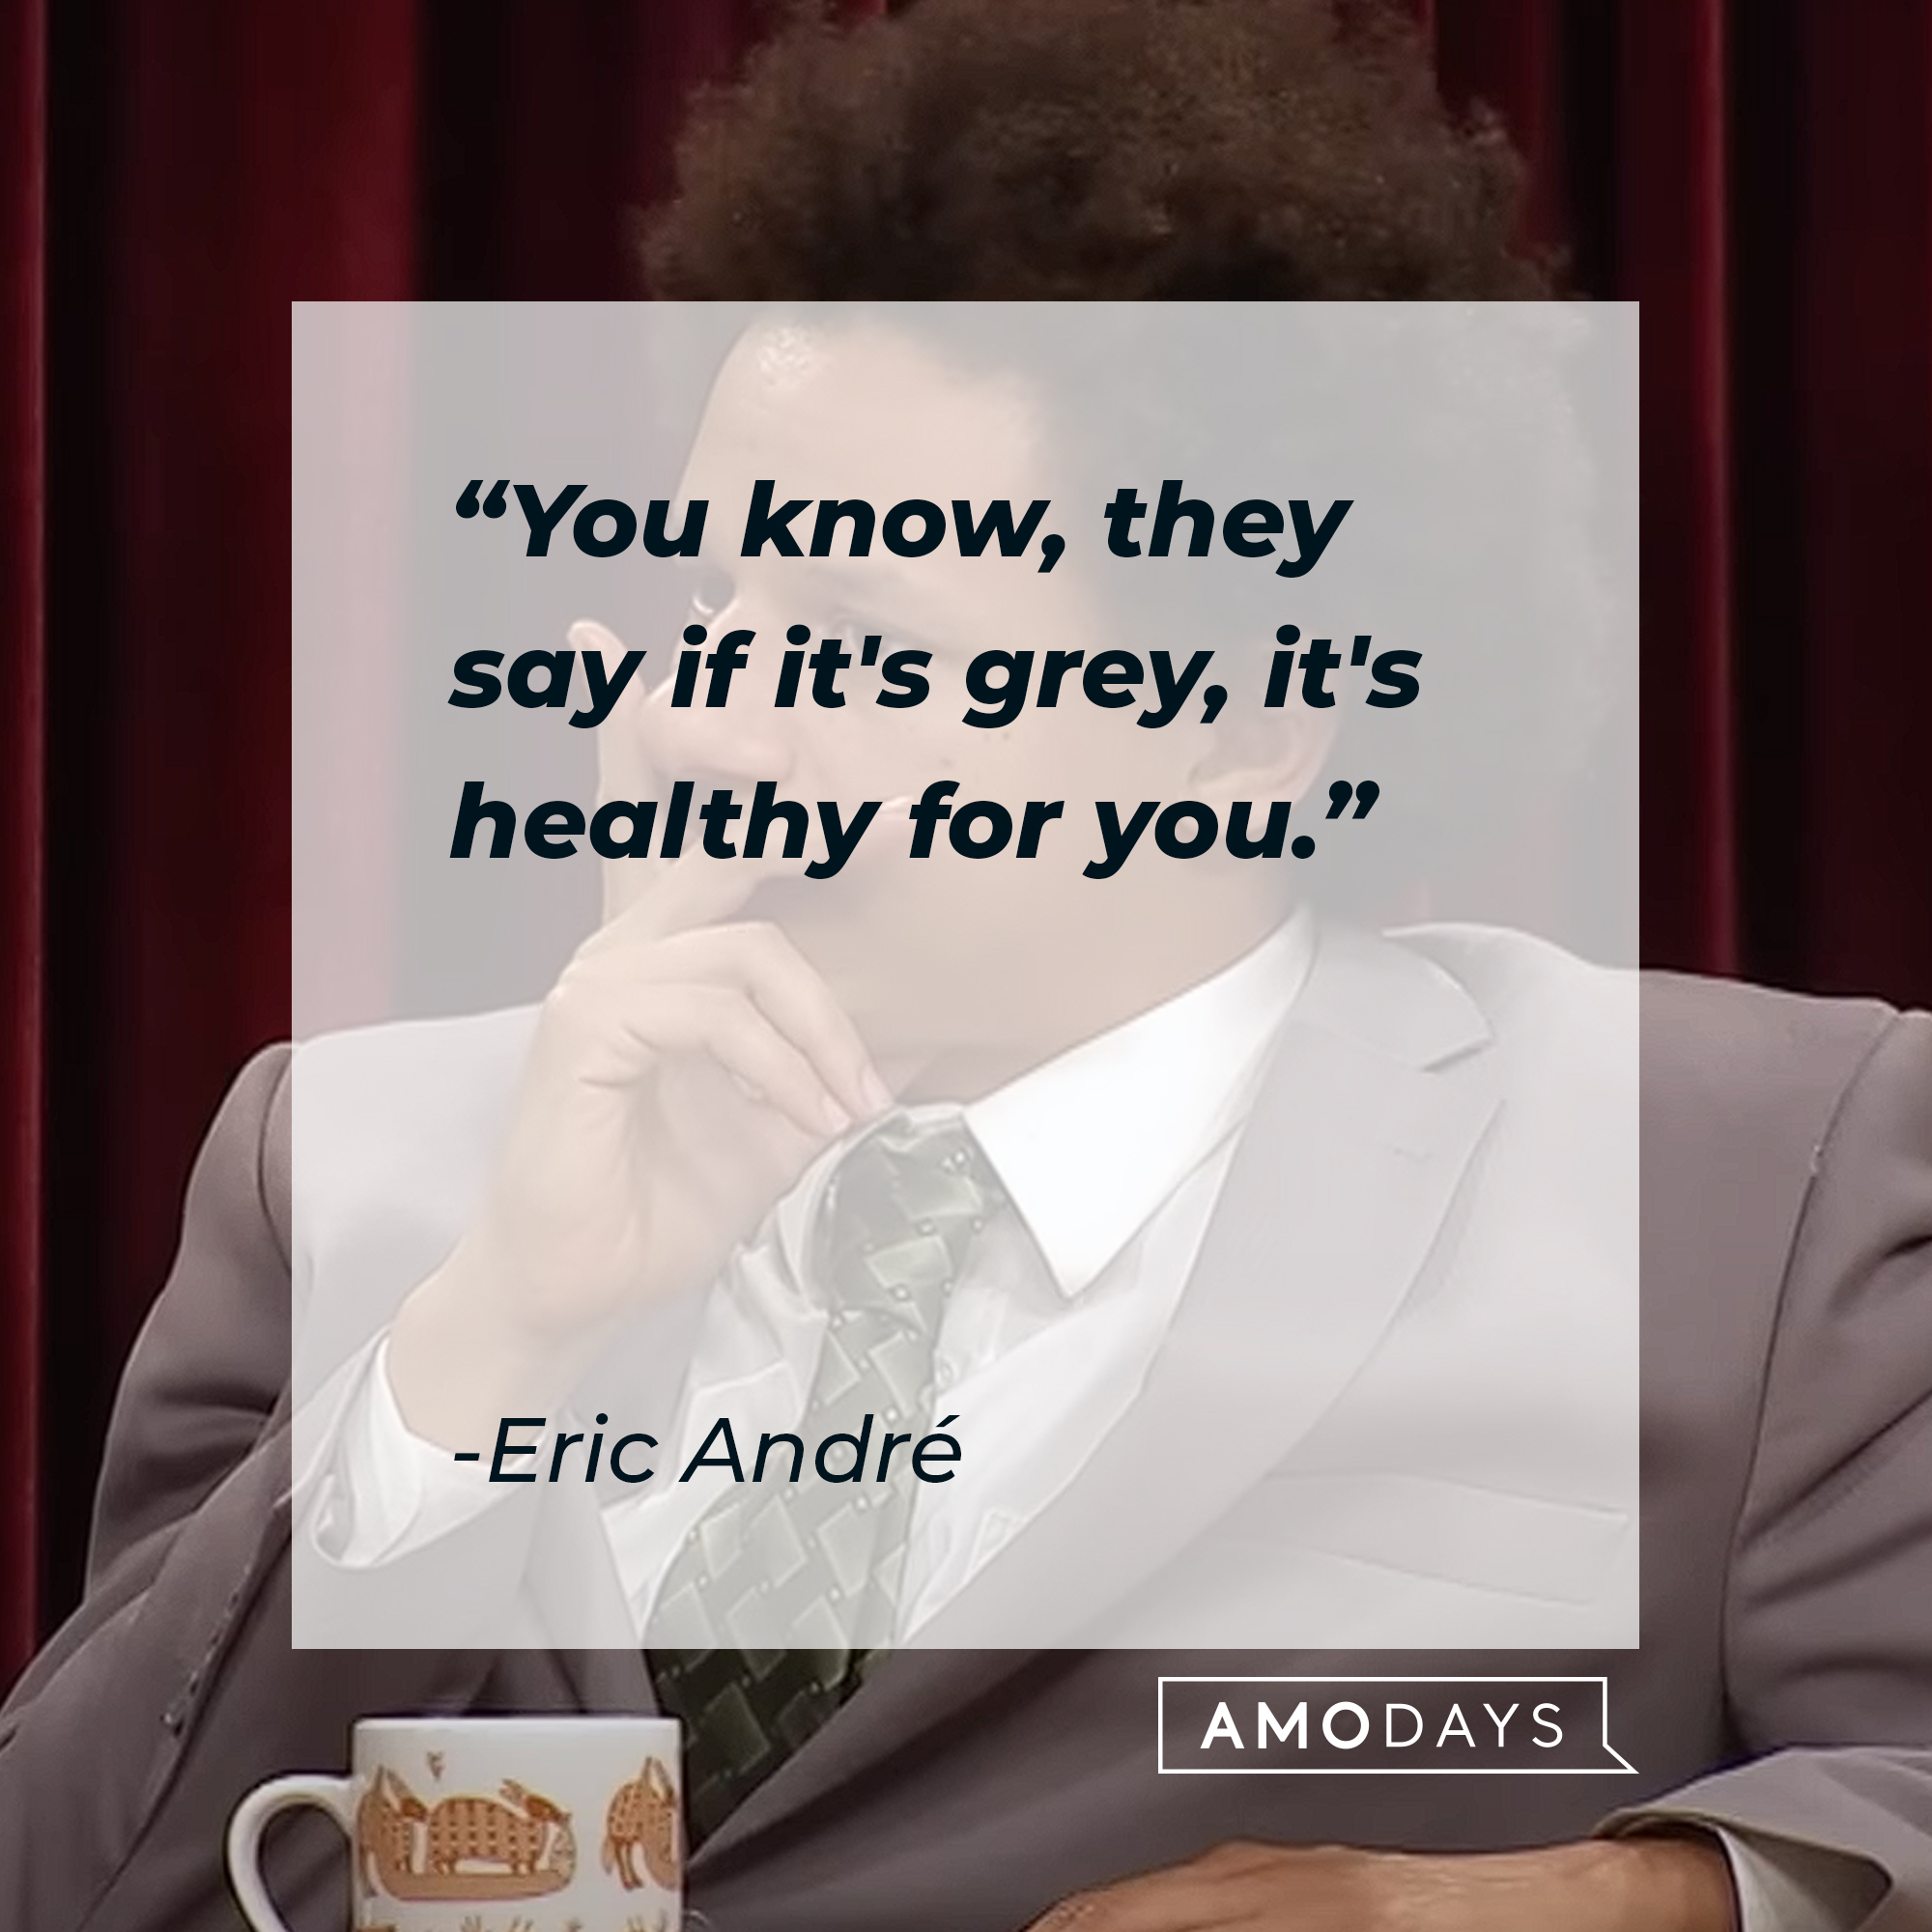 Eric André's quote: "You know, they say if it's grey, it's healthy for you." | Source: Youtube.com/adultswim